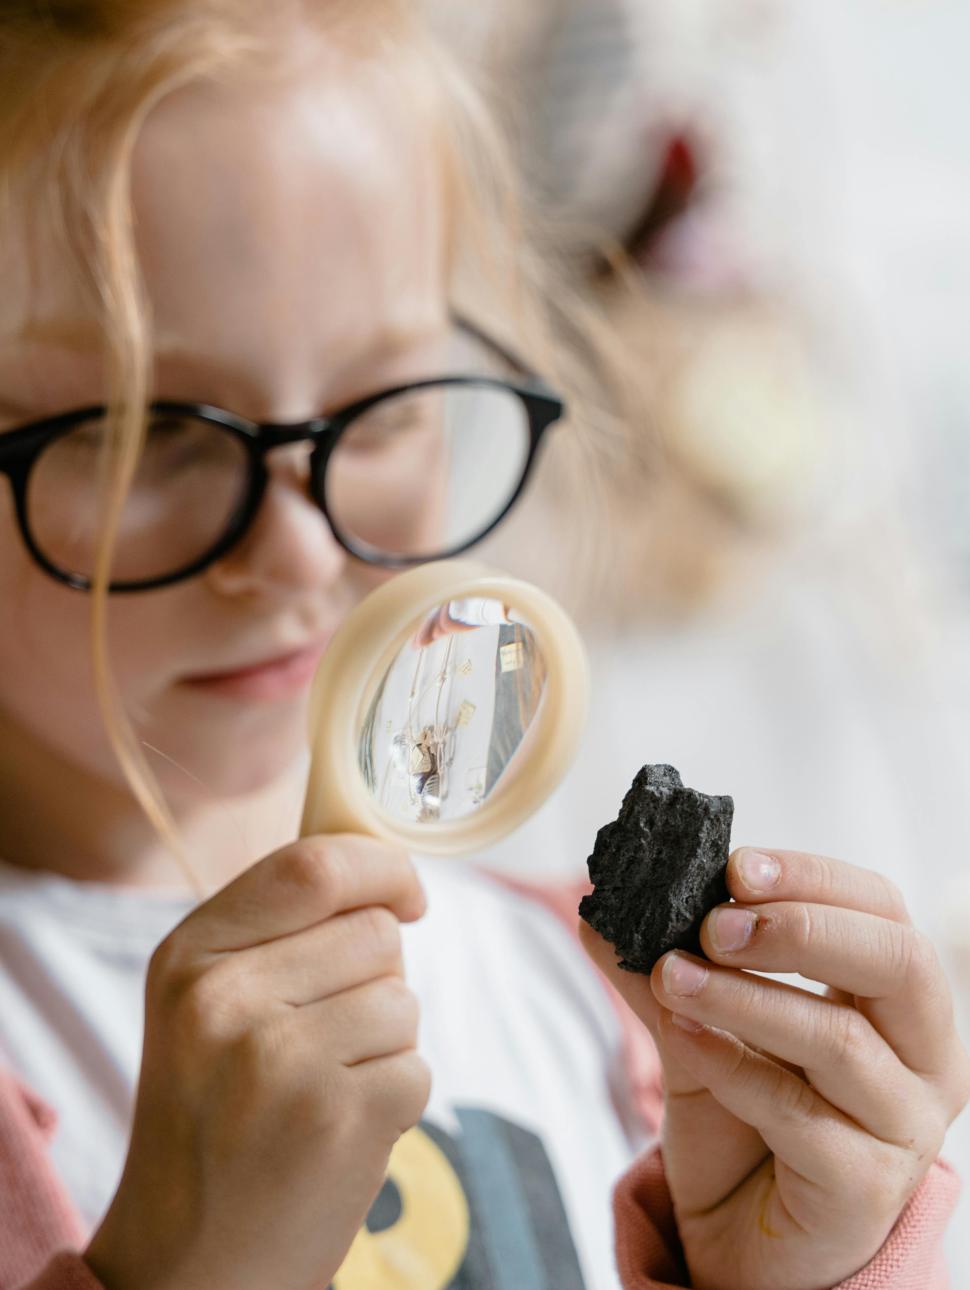 A yound child holds a dark coloured rock in one hand and holds a magnifying glass in another hand. They are looking at the rock in detail using the magnifying glass